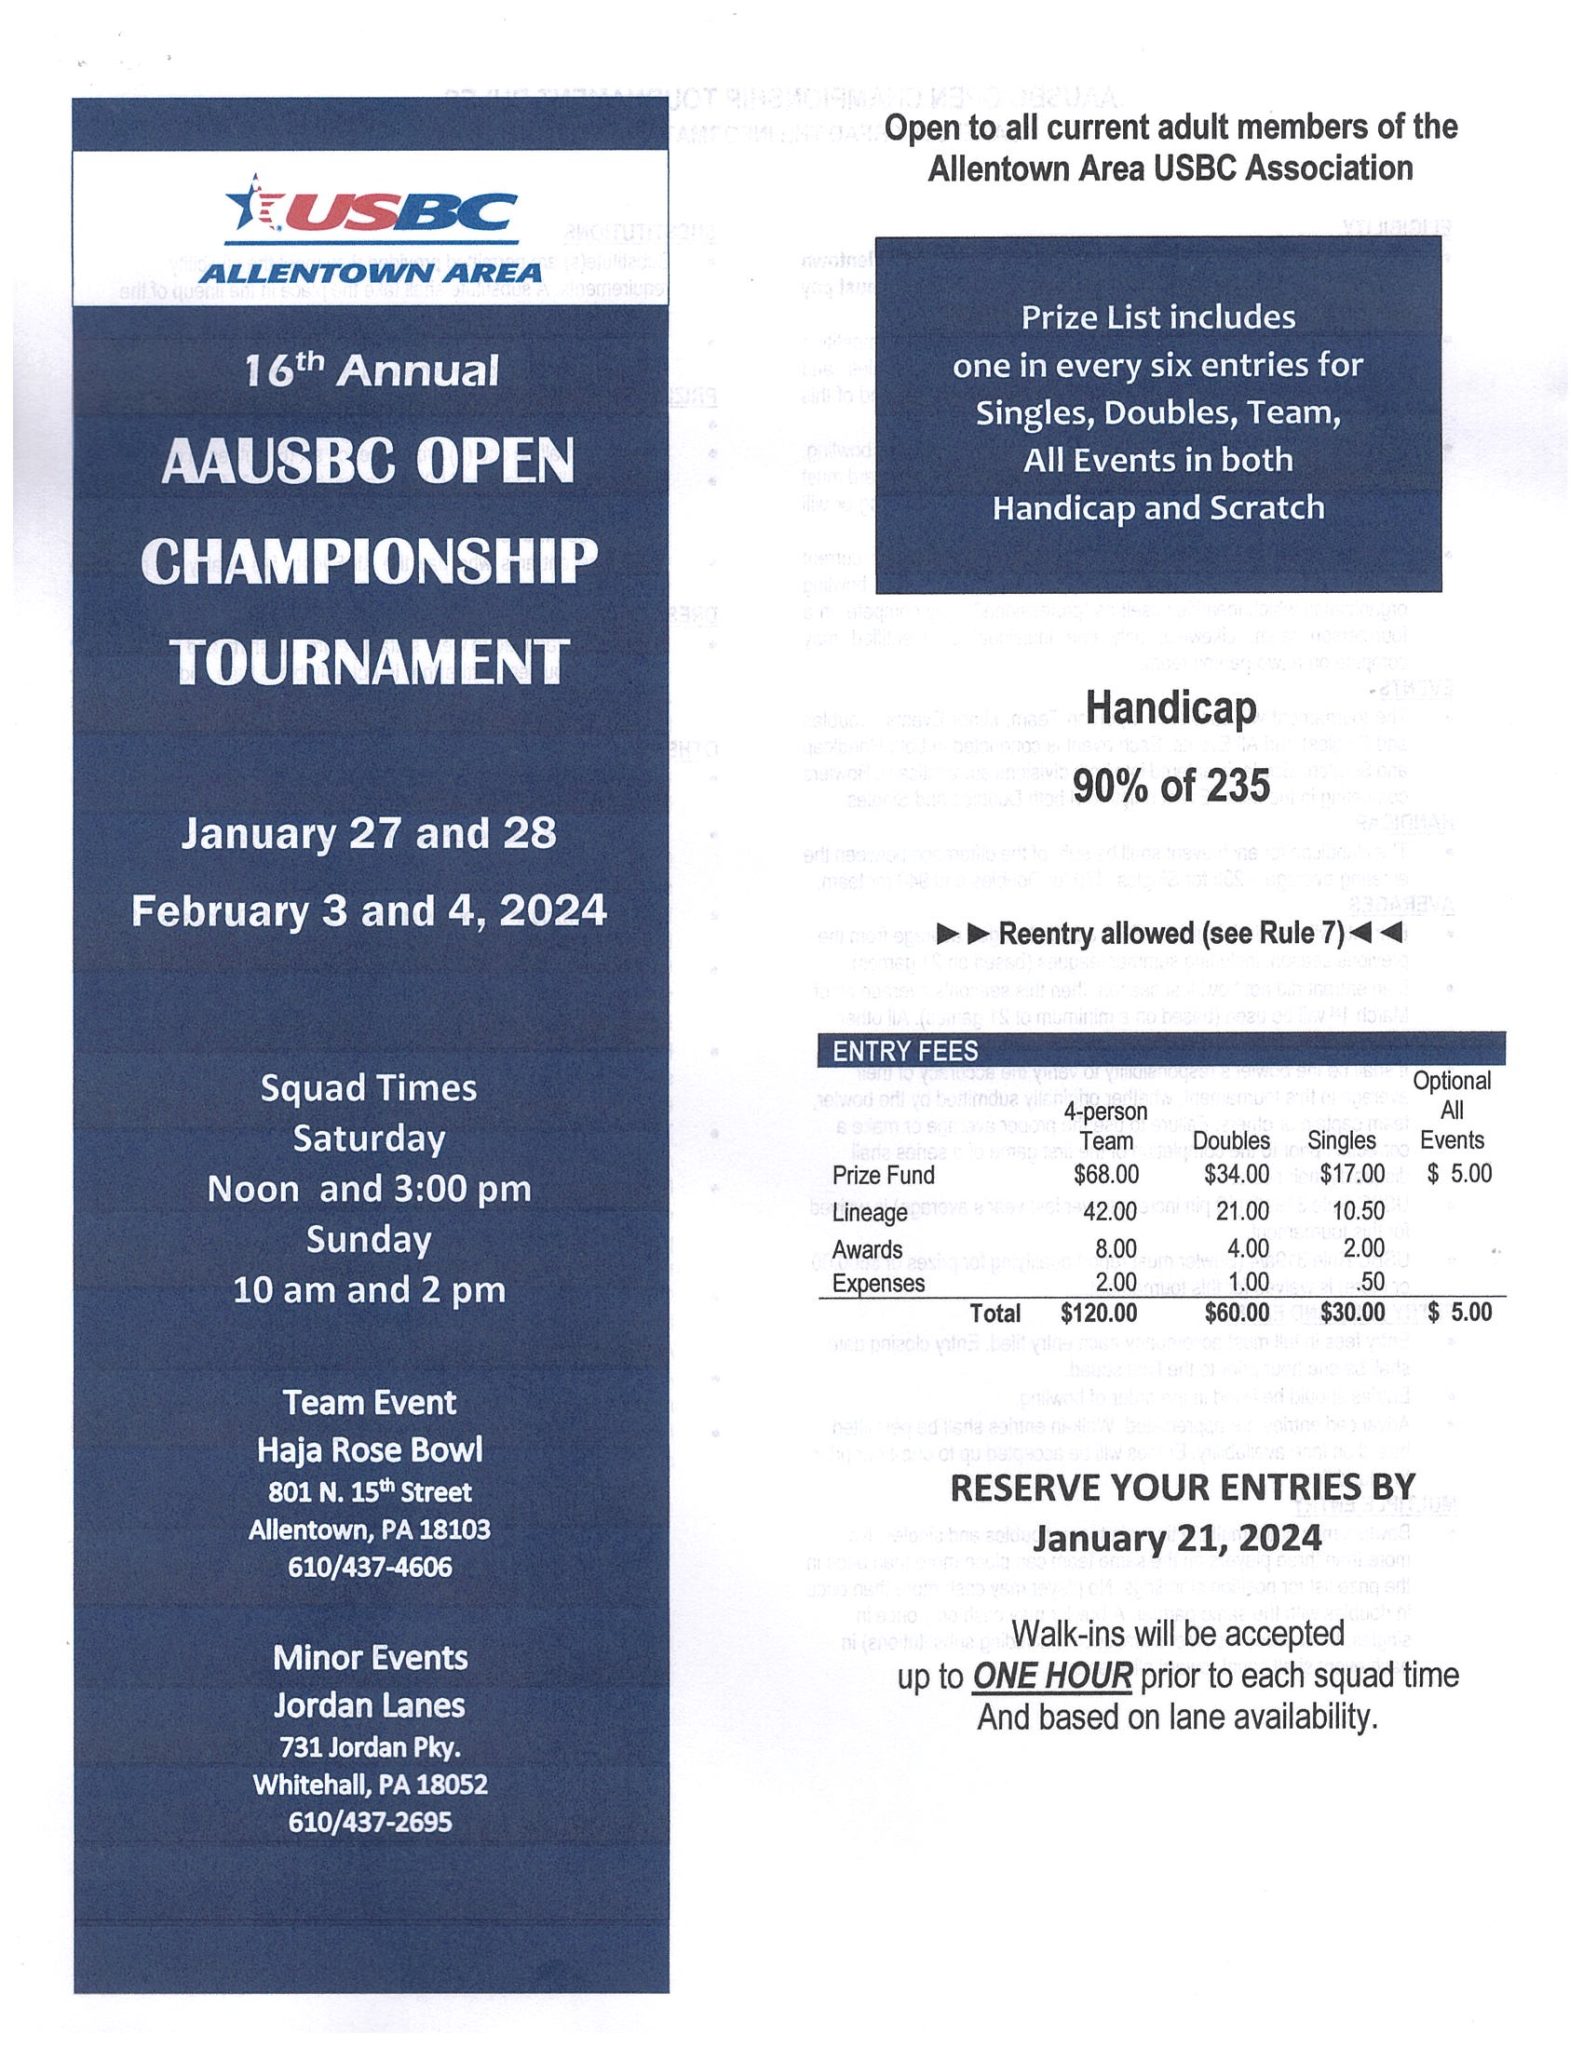 16th Annual AAUSBC Open Championship Tournament 1